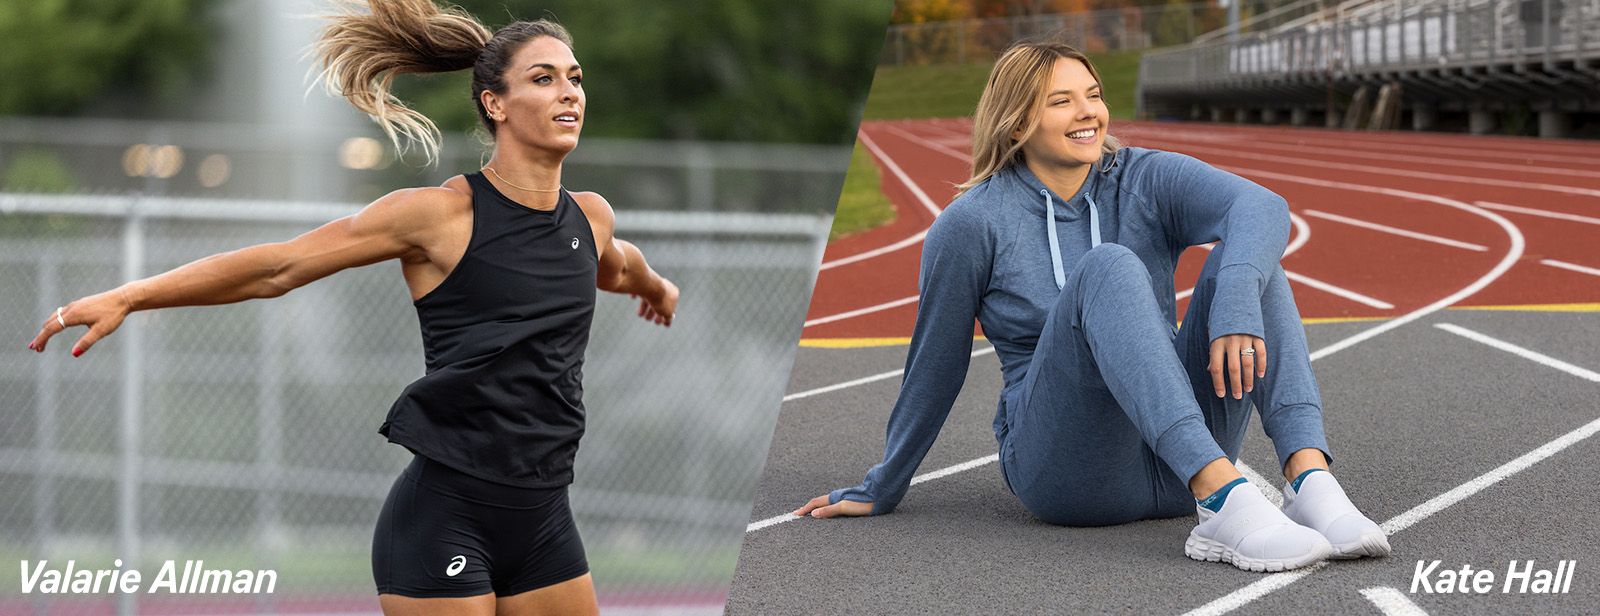 Inside ASICS Running/Track and Field Athletes